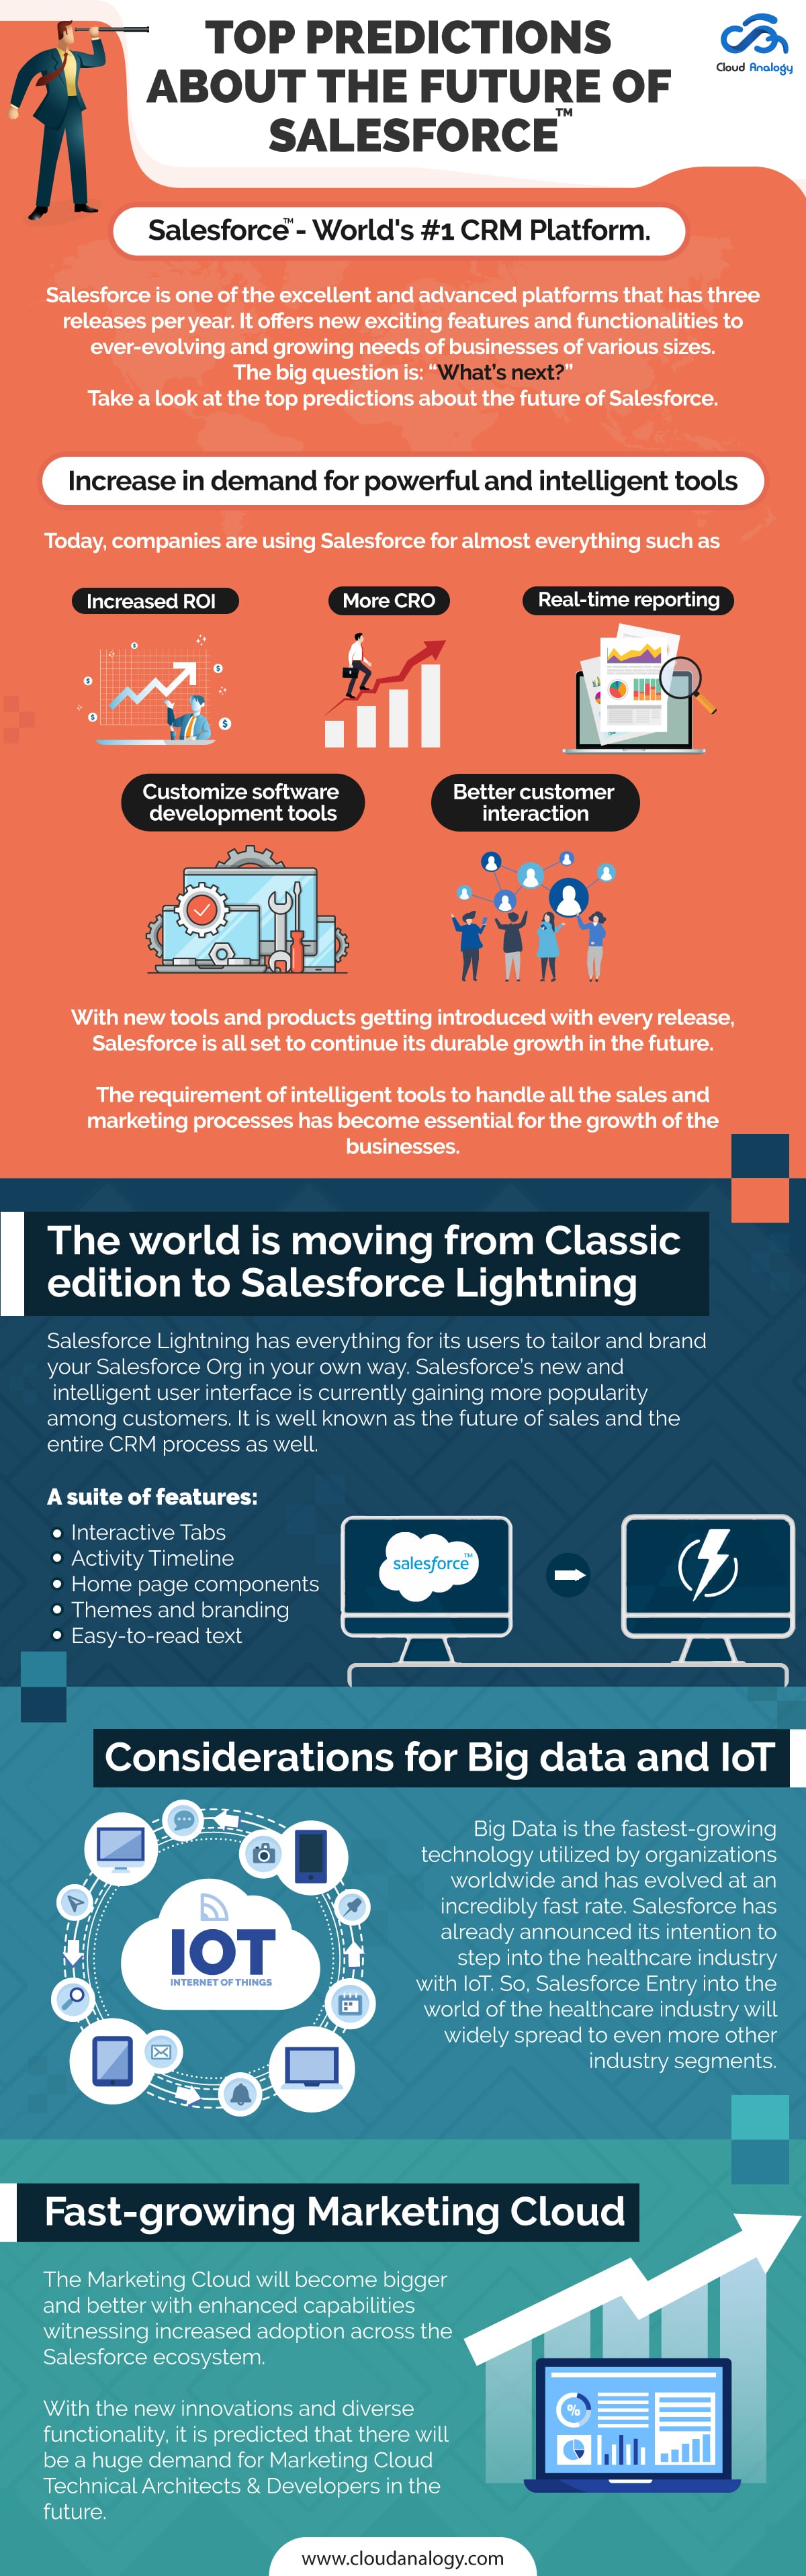 Top predictions about the future of Salesforce